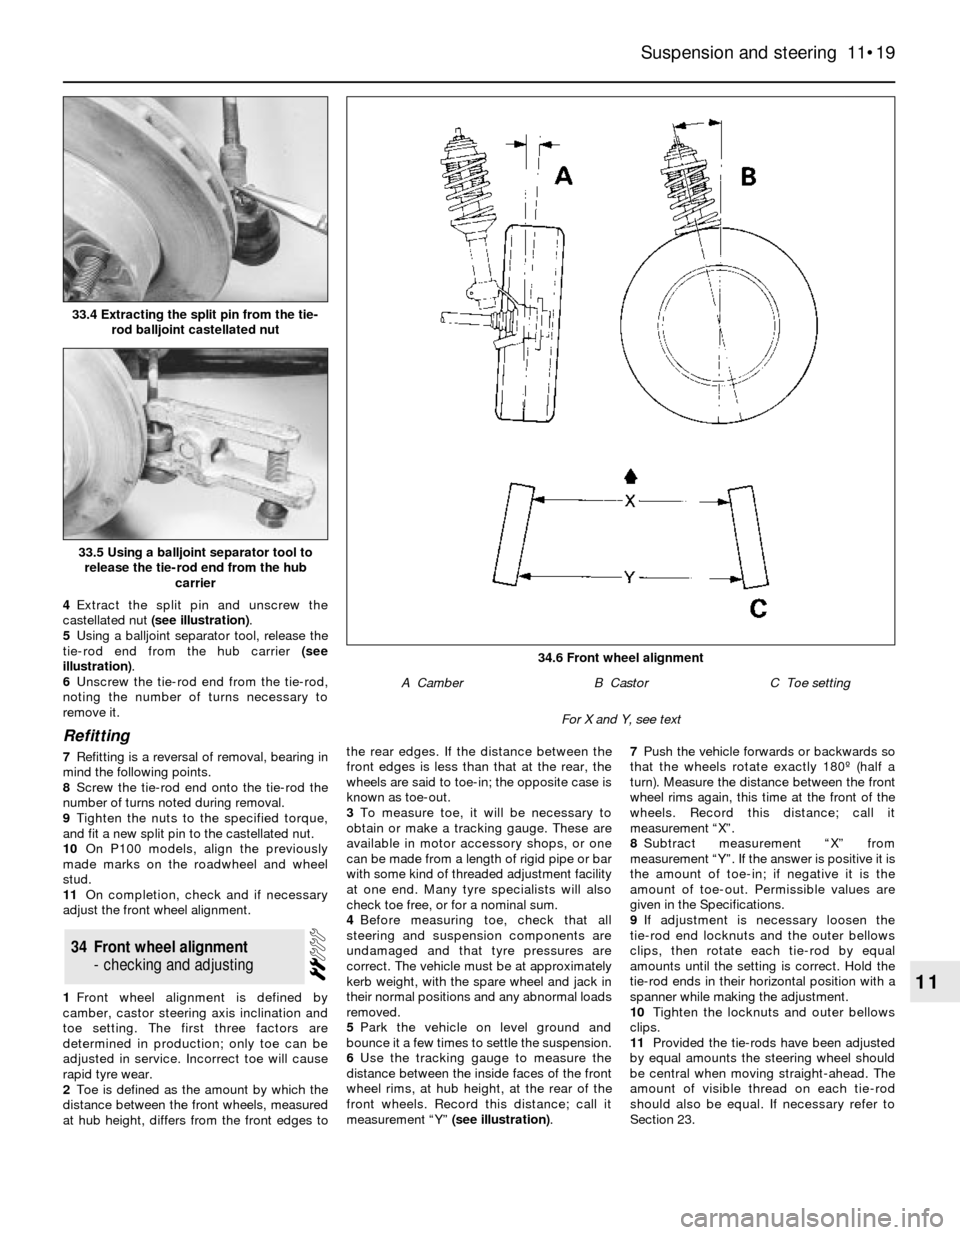 FORD SIERRA 1988 2.G Suspension And Steering Workshop Manual 4Extract the split pin and unscrew the
castellated nut (see illustration).
5Using a balljoint separator tool, release the
tie-rod end from the hub carrier (see
illustration).
6Unscrew the tie-rod end 